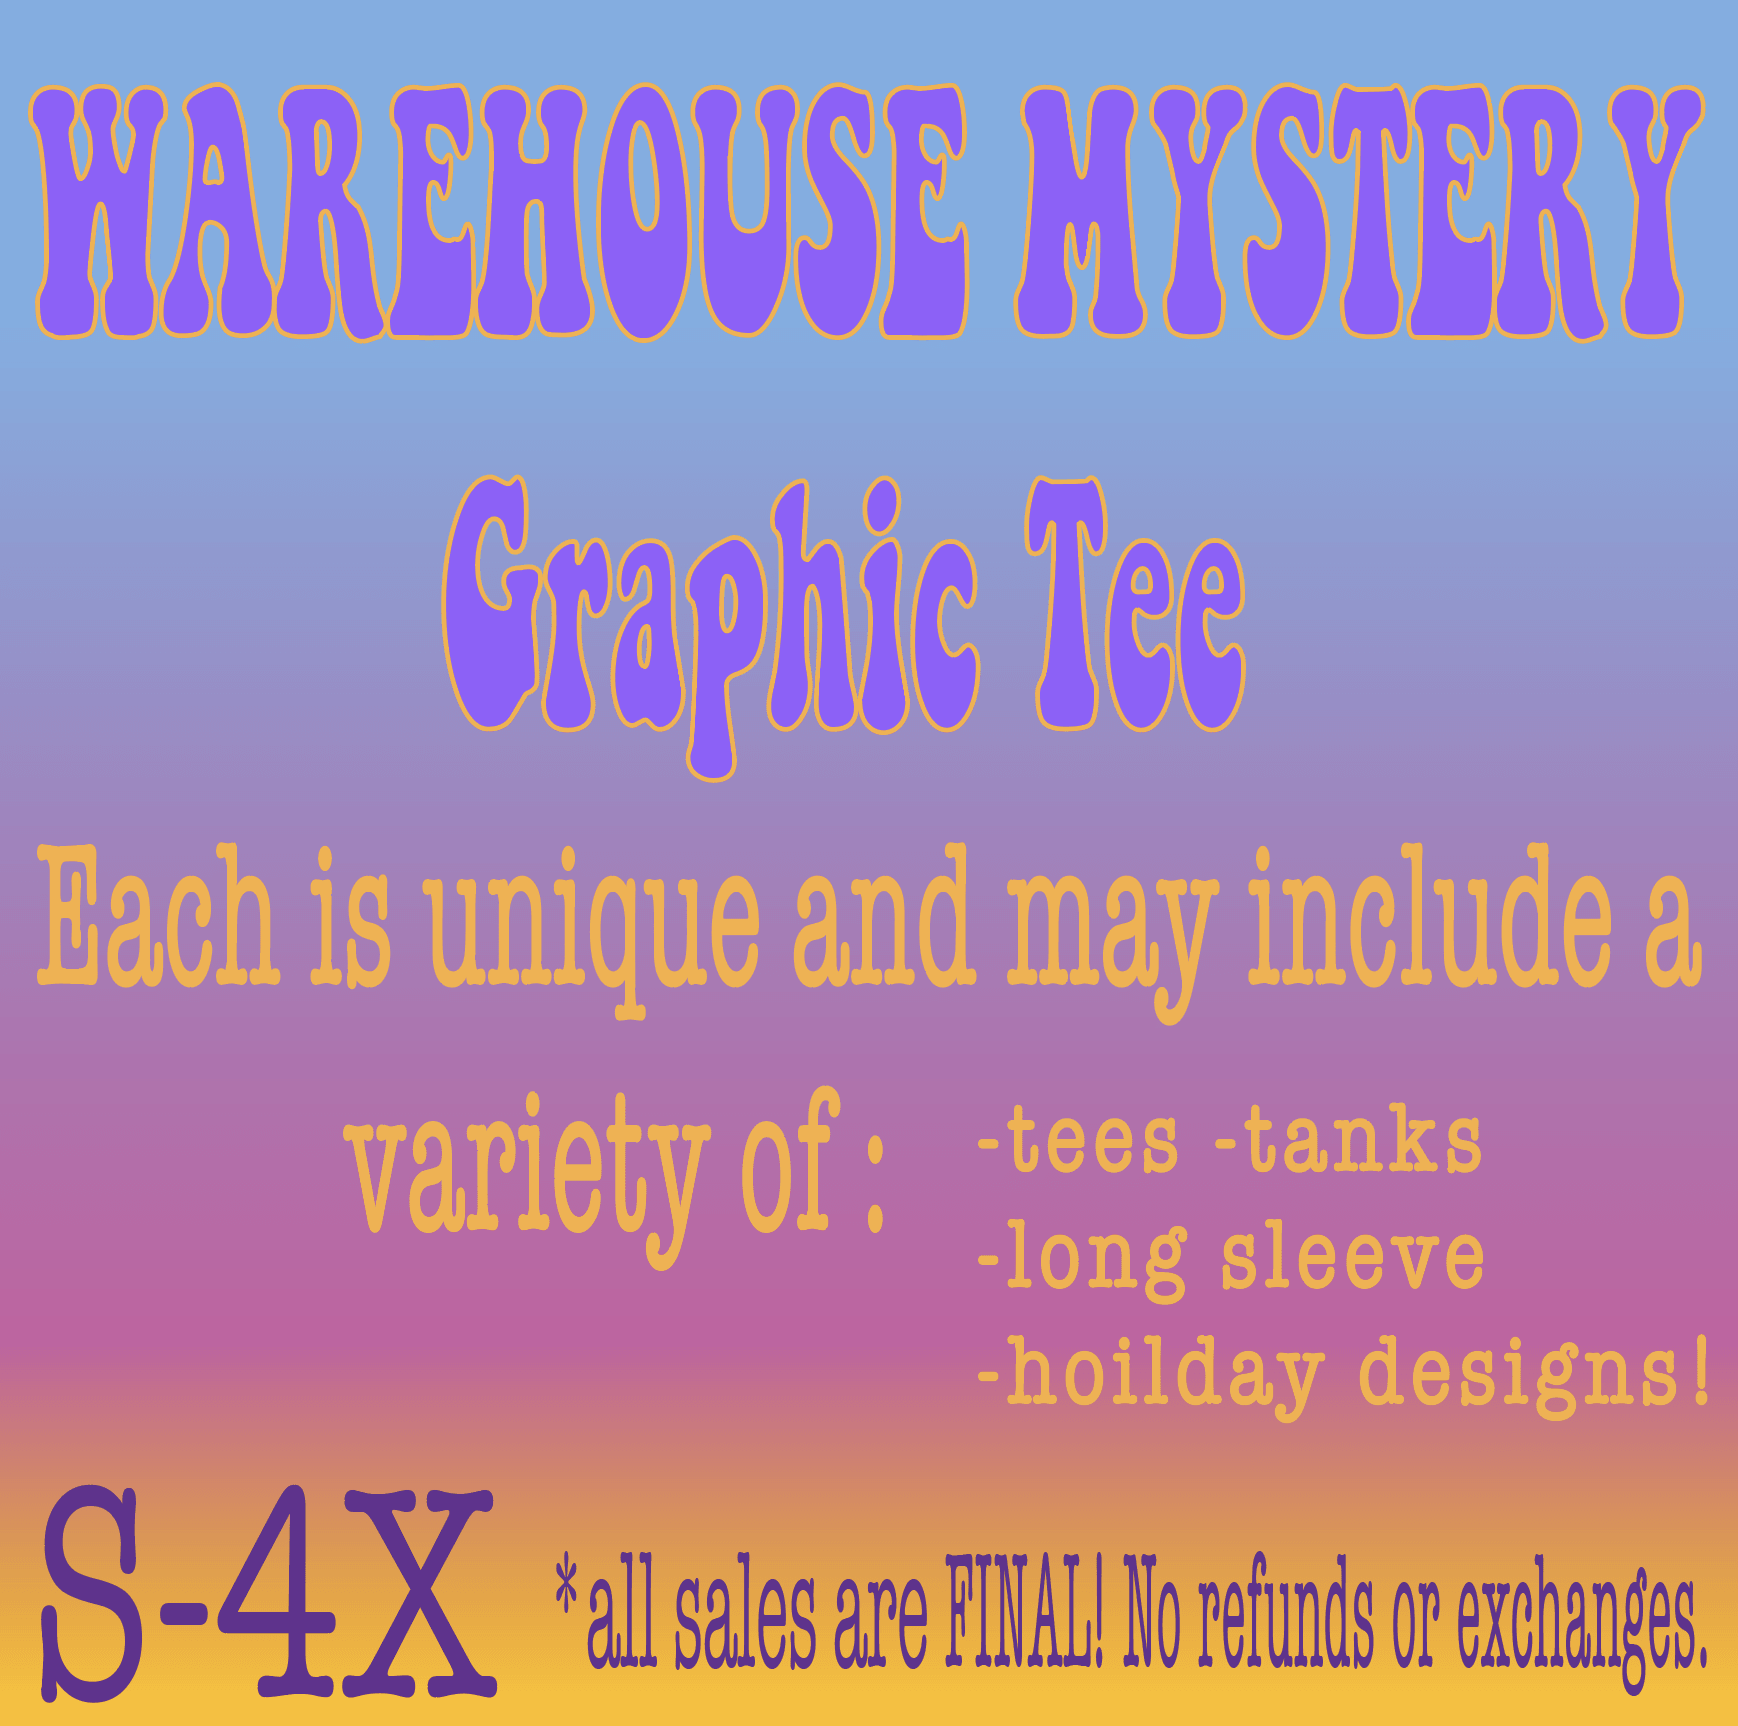 Warehouse Mystery Graphic Tee - Signastyle Boutique